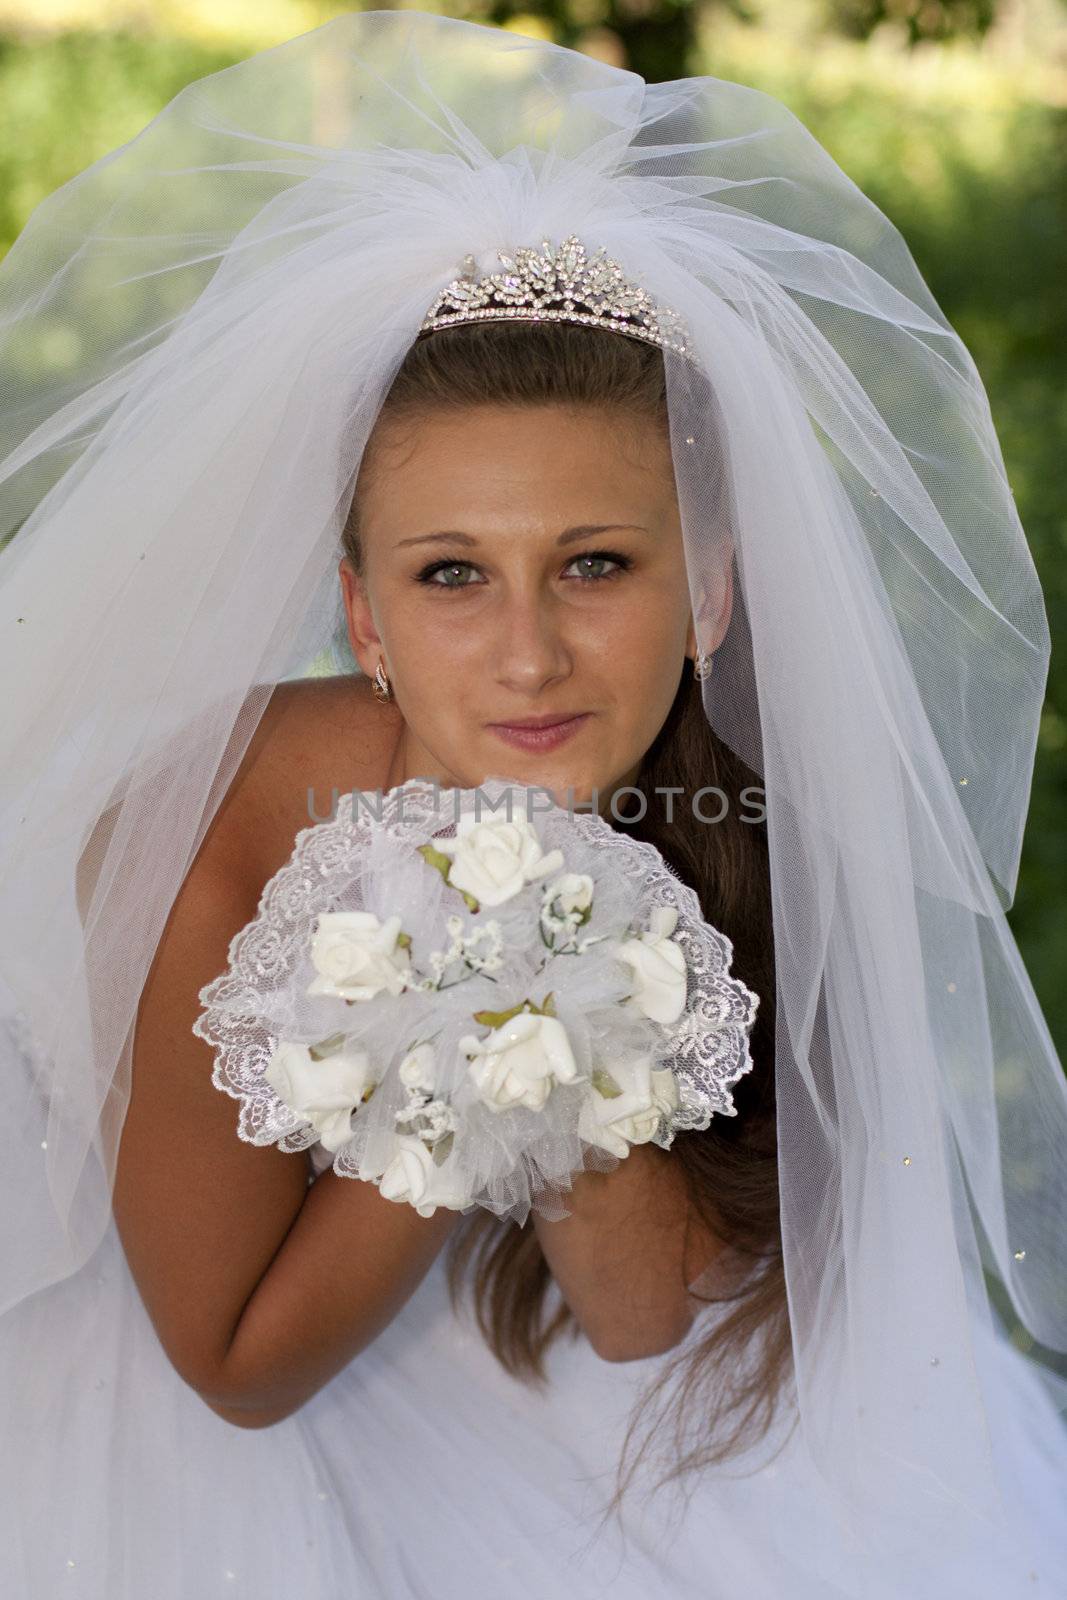 The bride with a bouquet of white flowers